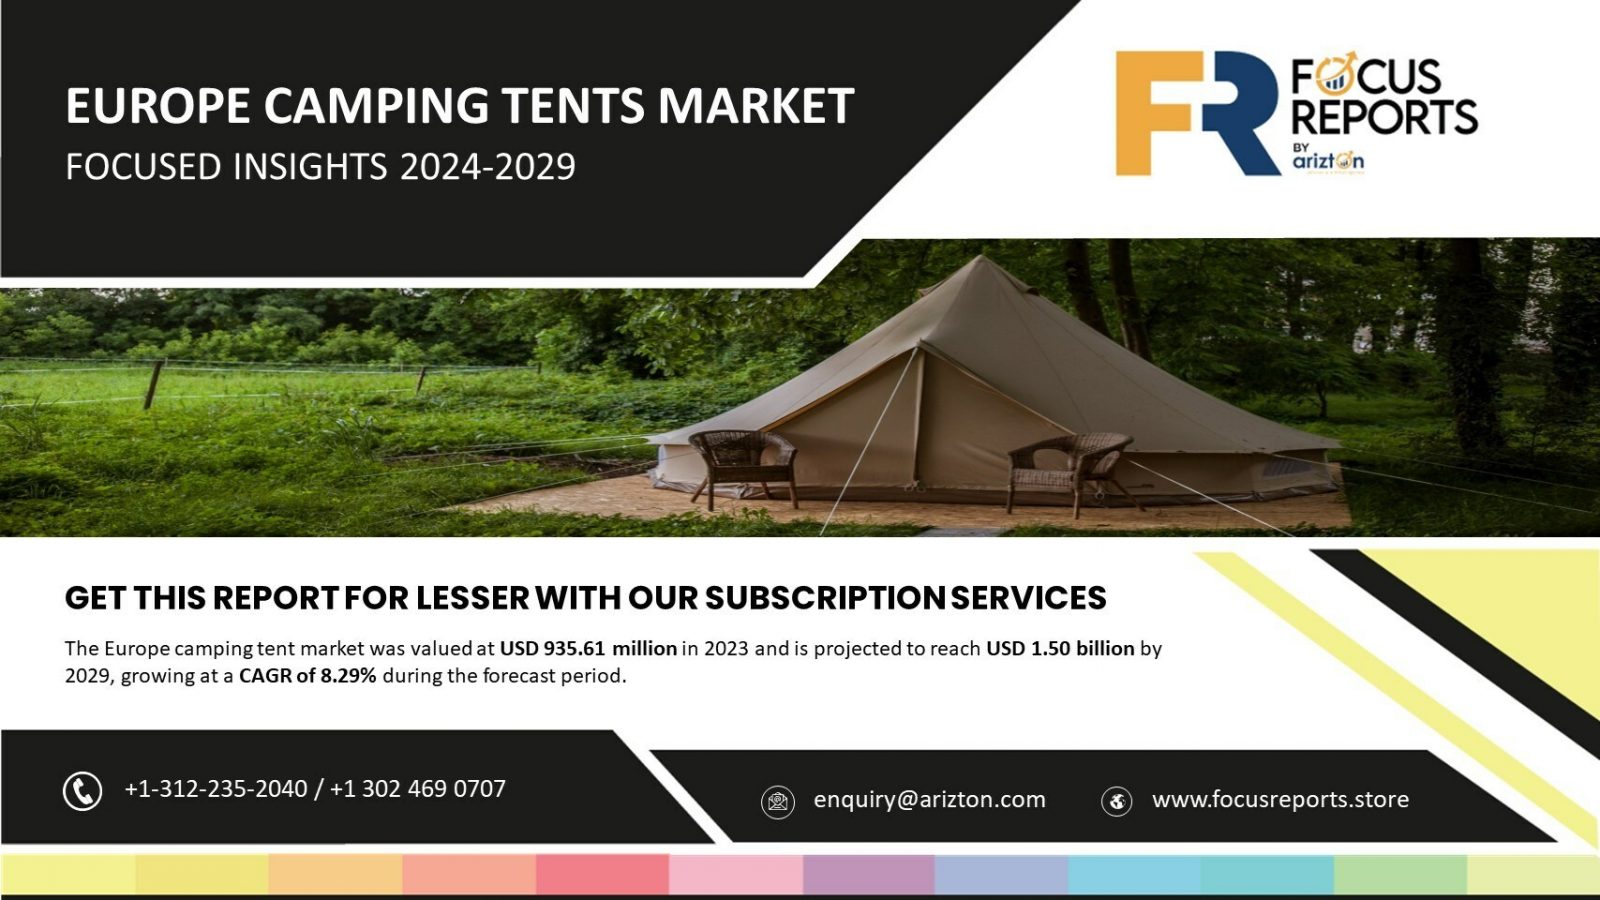 Europe Camping Tents Market - Focused Insights